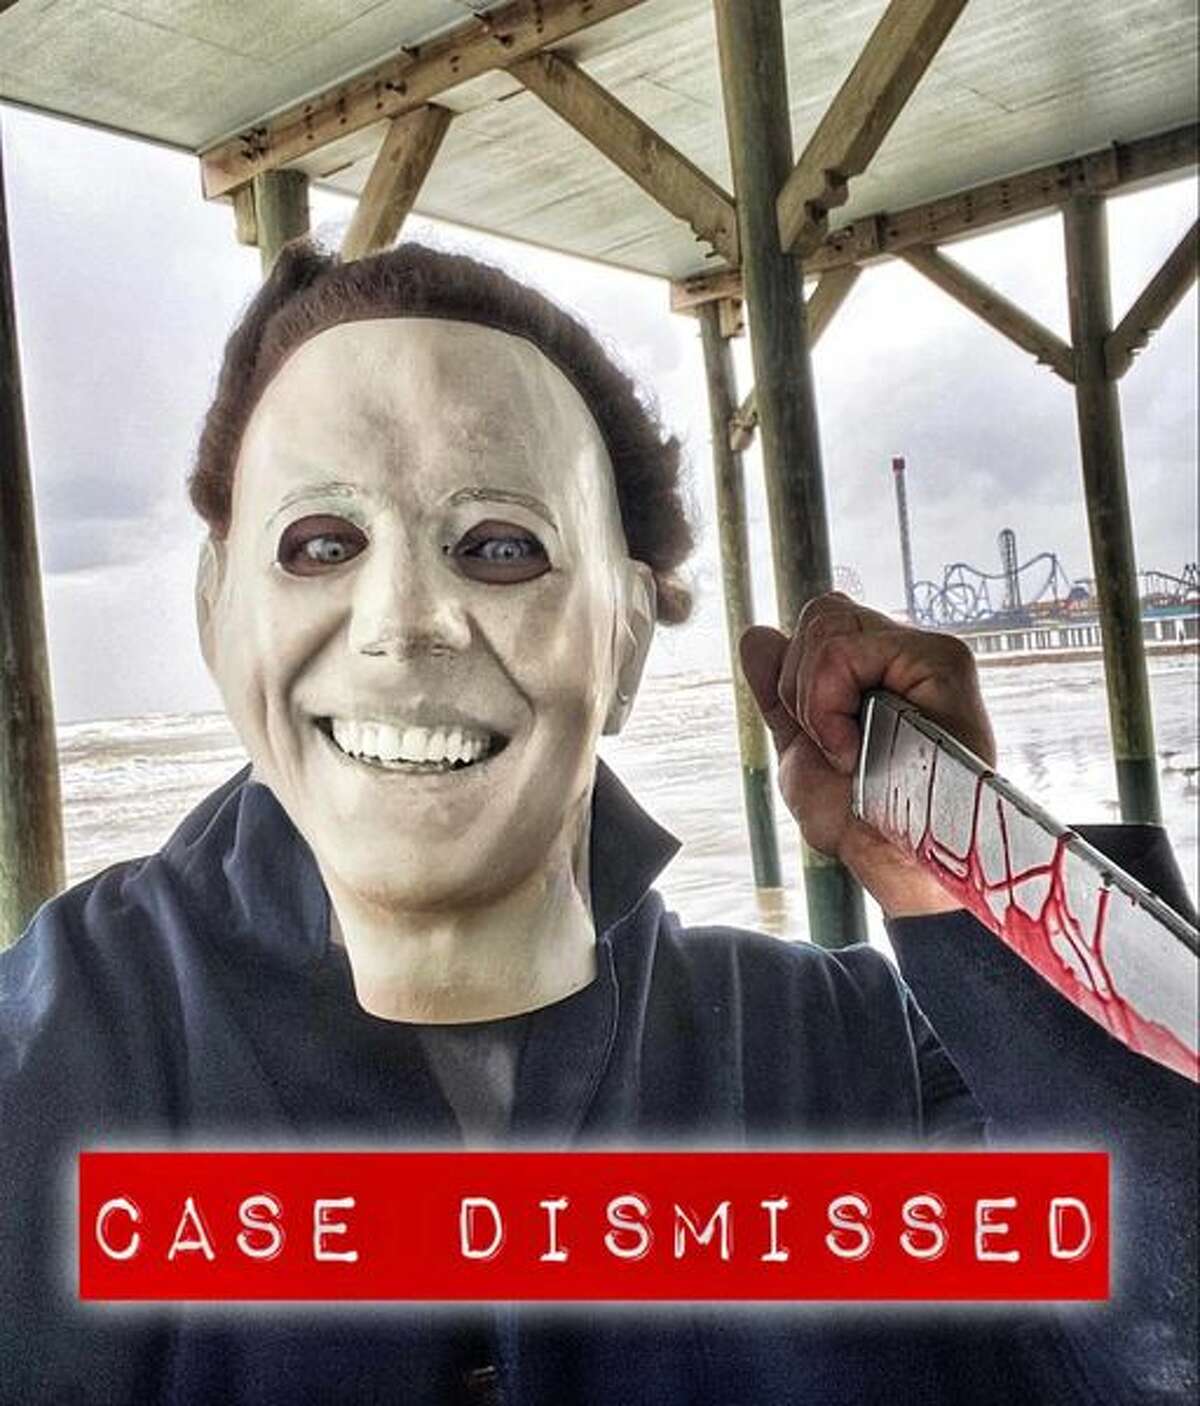 The Galveston attorney who made headlines earlier this year after appearing on Galveston beach ahead of Tropical Storm Nicholas dressed as Michael Myers has had his case dismissed. 